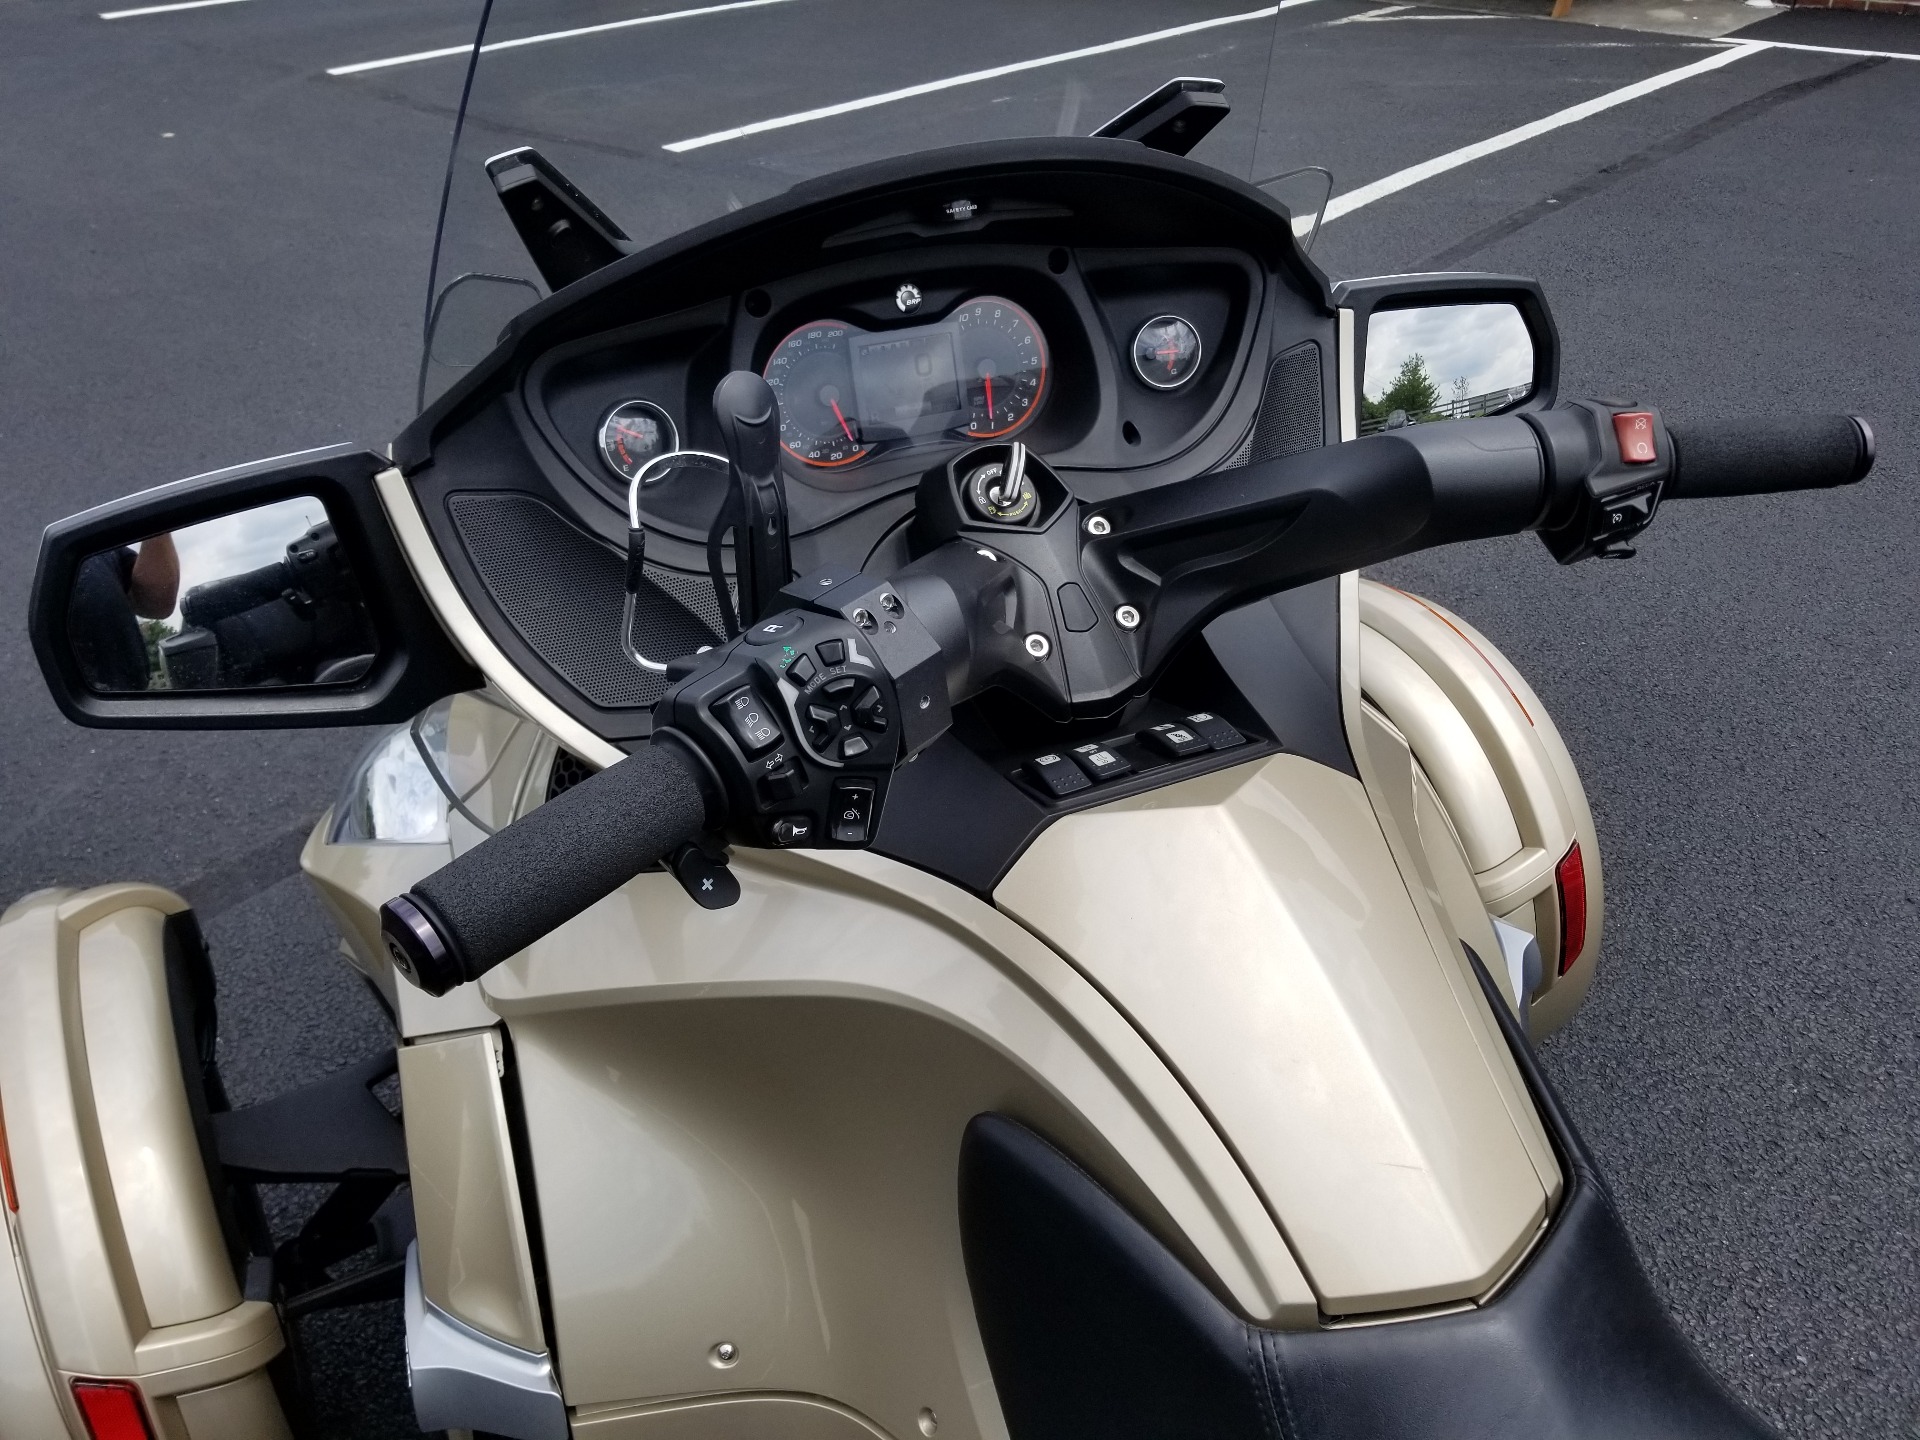 2017 Can-Am Spyder RT Limited in Grantville, Pennsylvania - Photo 8